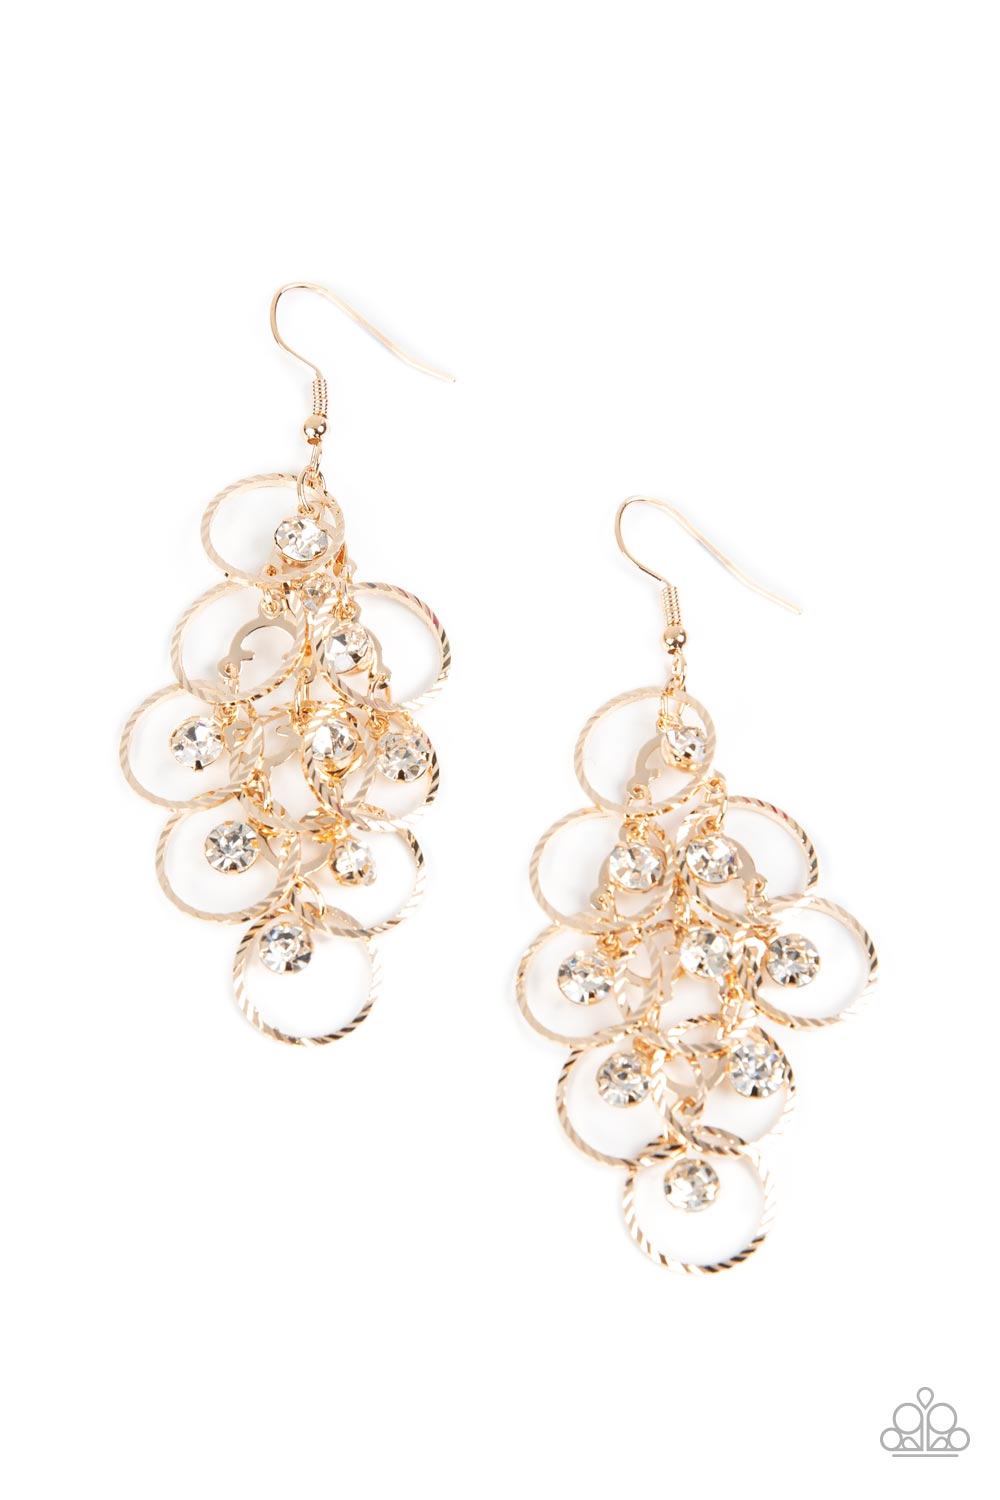 Head Rush Gold and White Rhinestone Earrings - Paparazzi Accessories- lightbox - CarasShop.com - $5 Jewelry by Cara Jewels